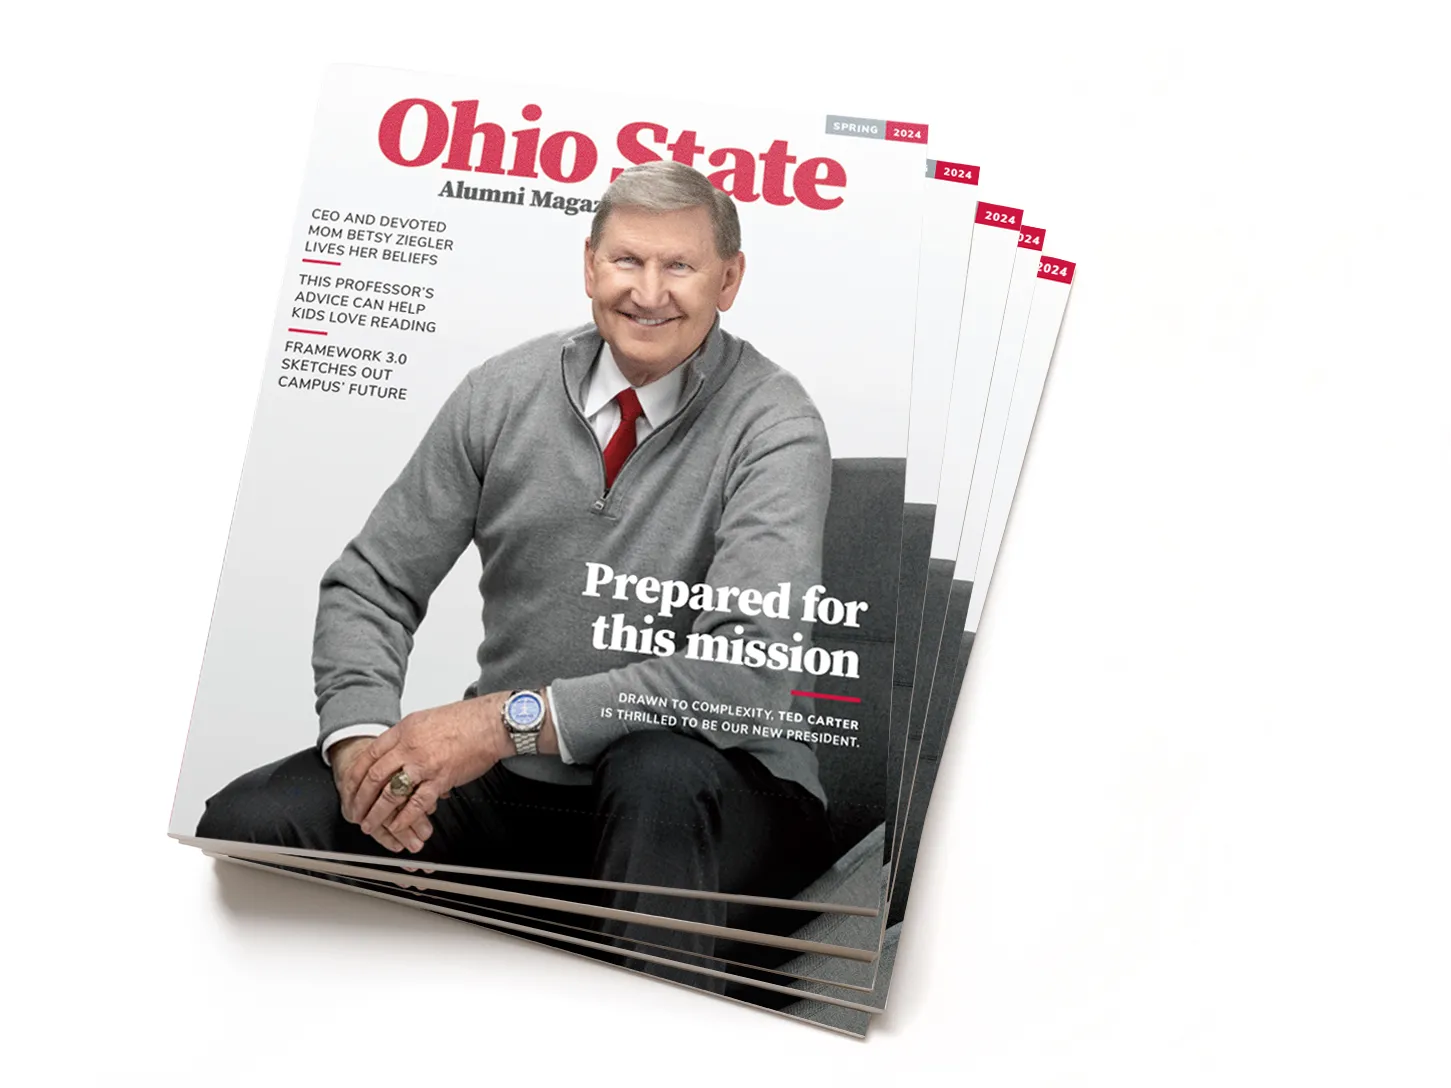 A stack of the spring issue of Ohio State Alumni Magazine. The cover shows Ted Carter, university president, who is smiling while posing. He’s sitting on a chair, leaning slightly toward the viewer, with his hands loosely clasped. He comes across as a friendly grandpa or an approachable professor—the kind who’s easy to talk to and interesting to talk to.